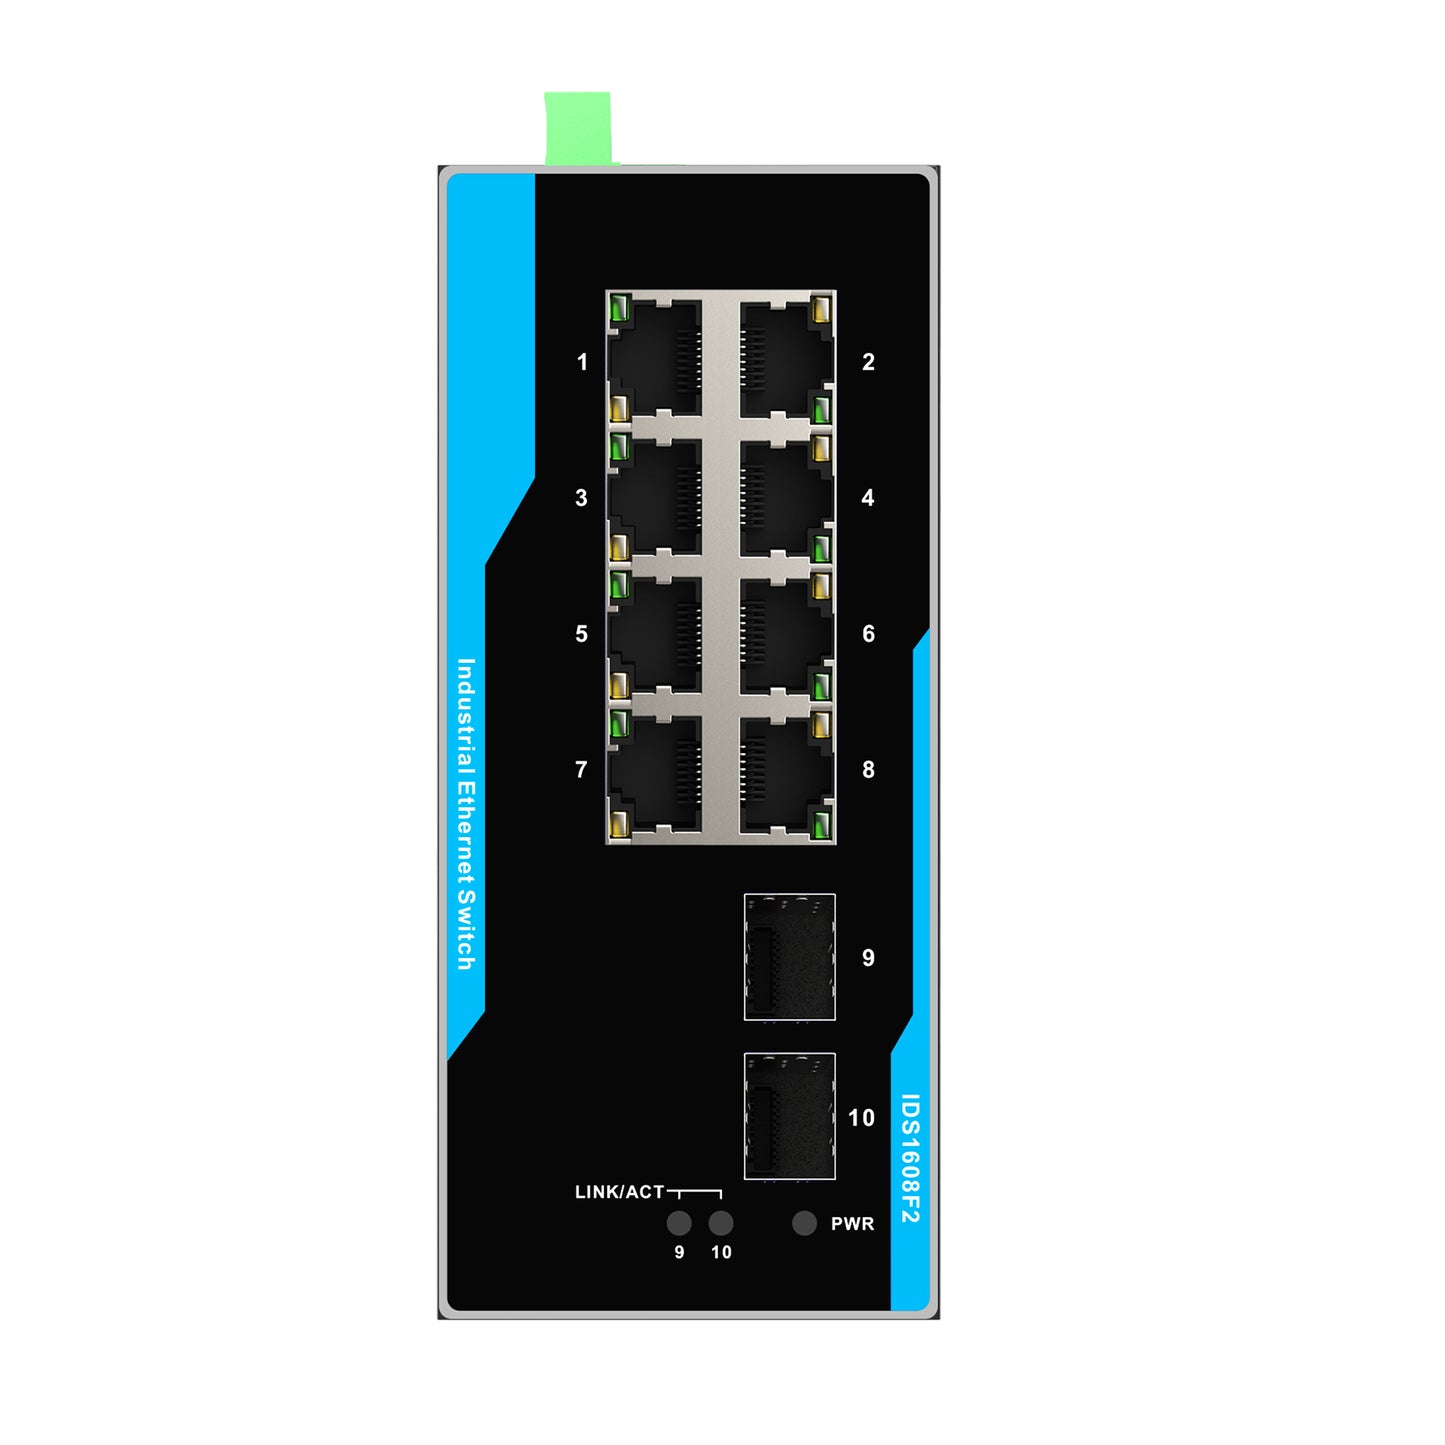 IDS1608F2 8GE+2SFP Din-rail Unmanaged Industrial Ethernet Switch